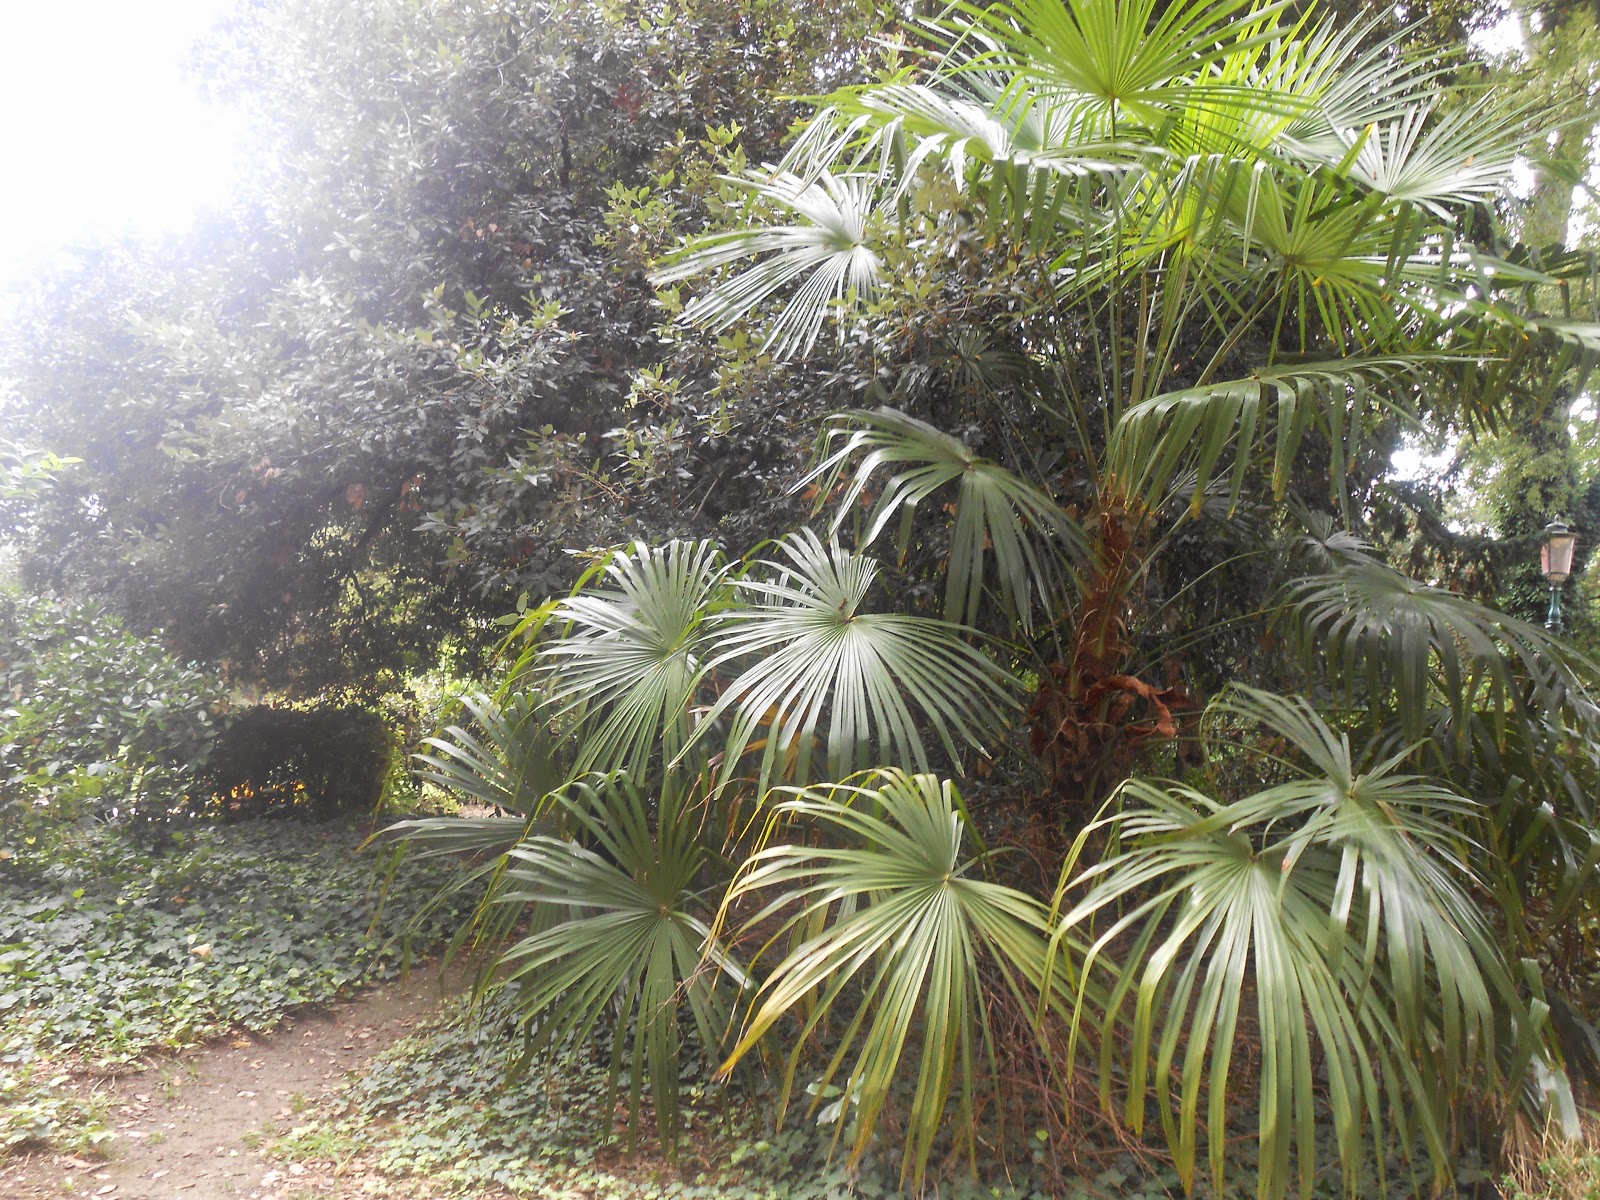 A VISIT TO THE OLDEST BOTANICAL GARDEN OF THE WORLD